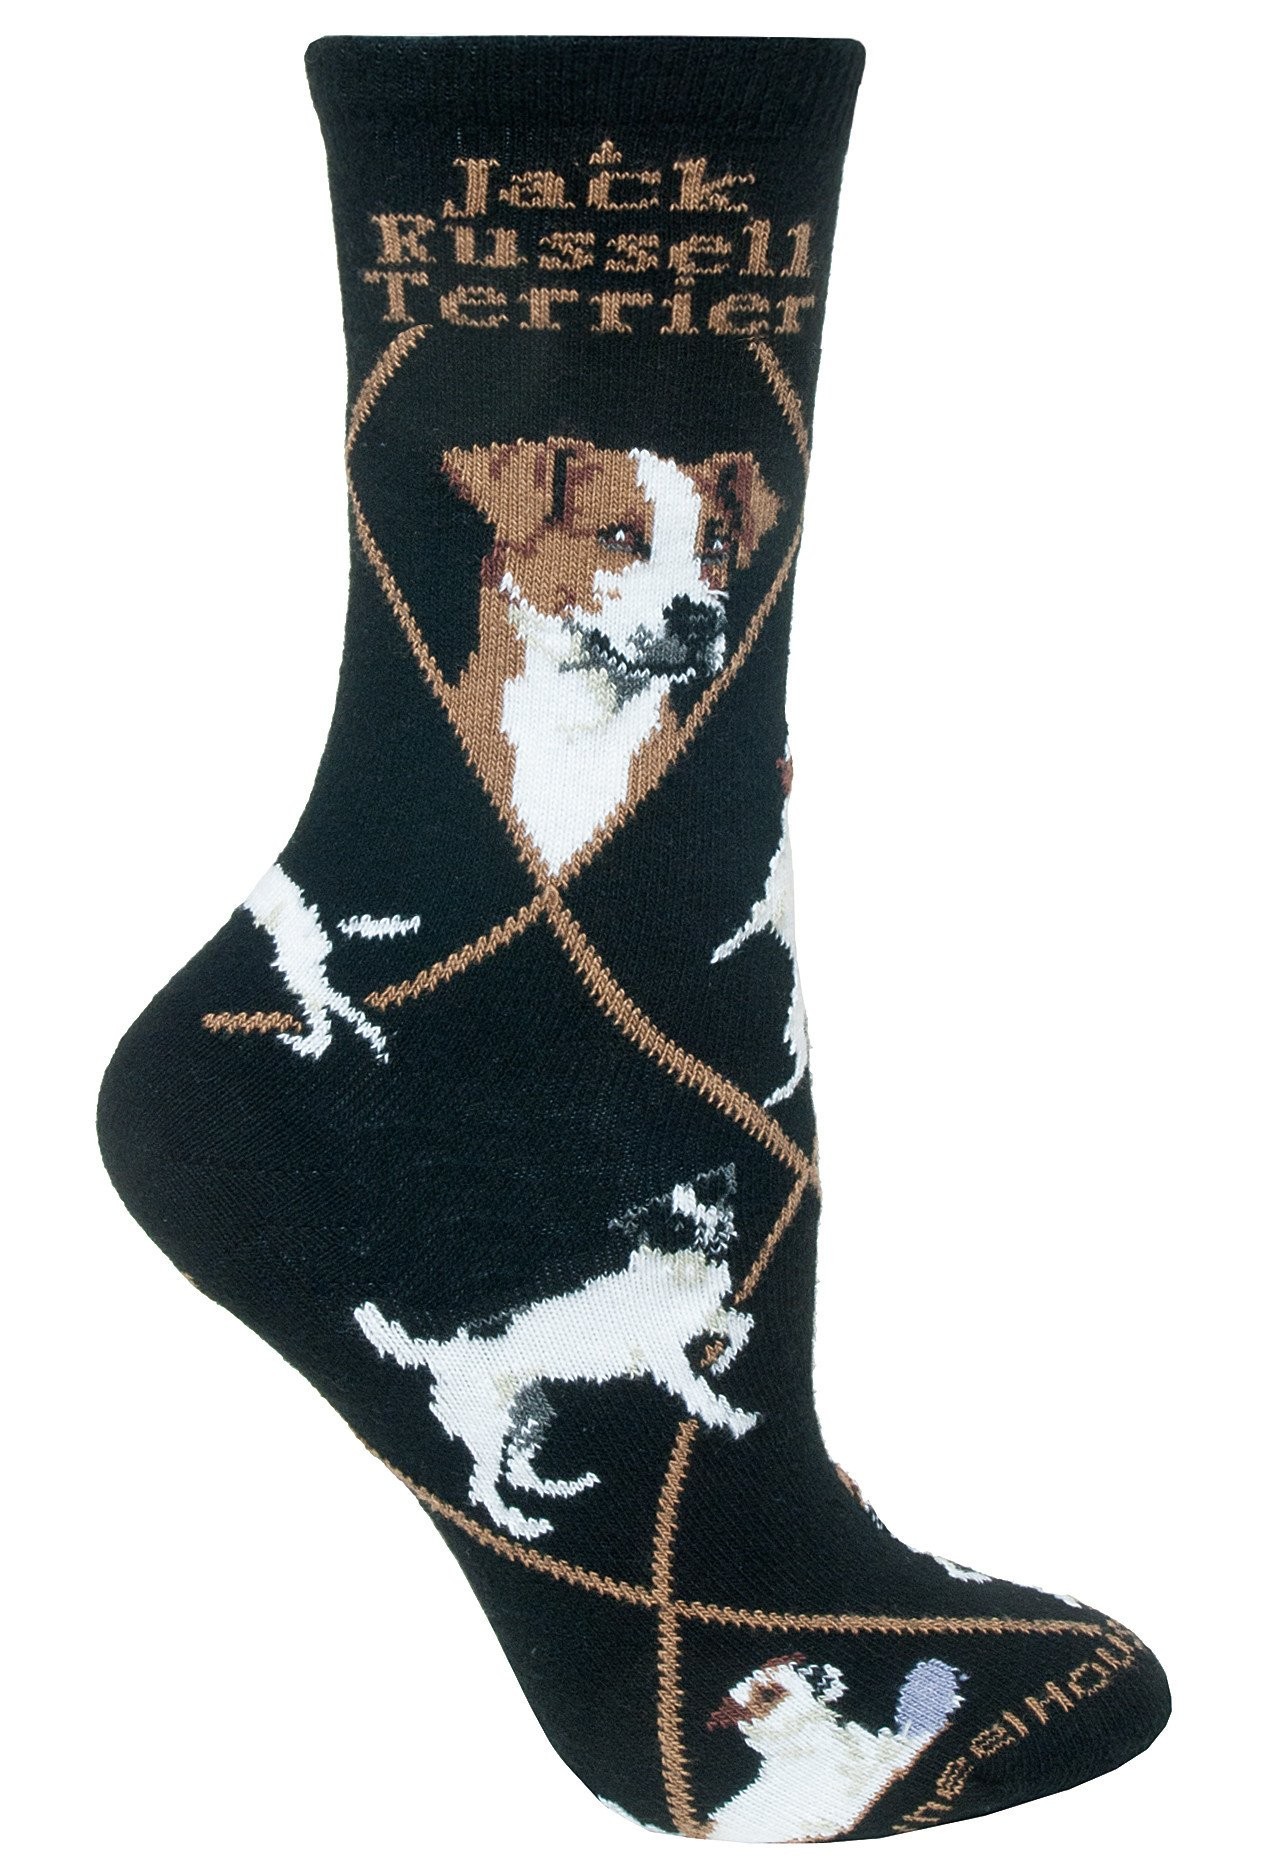 Jack Russell Sock on Black Size 10-13